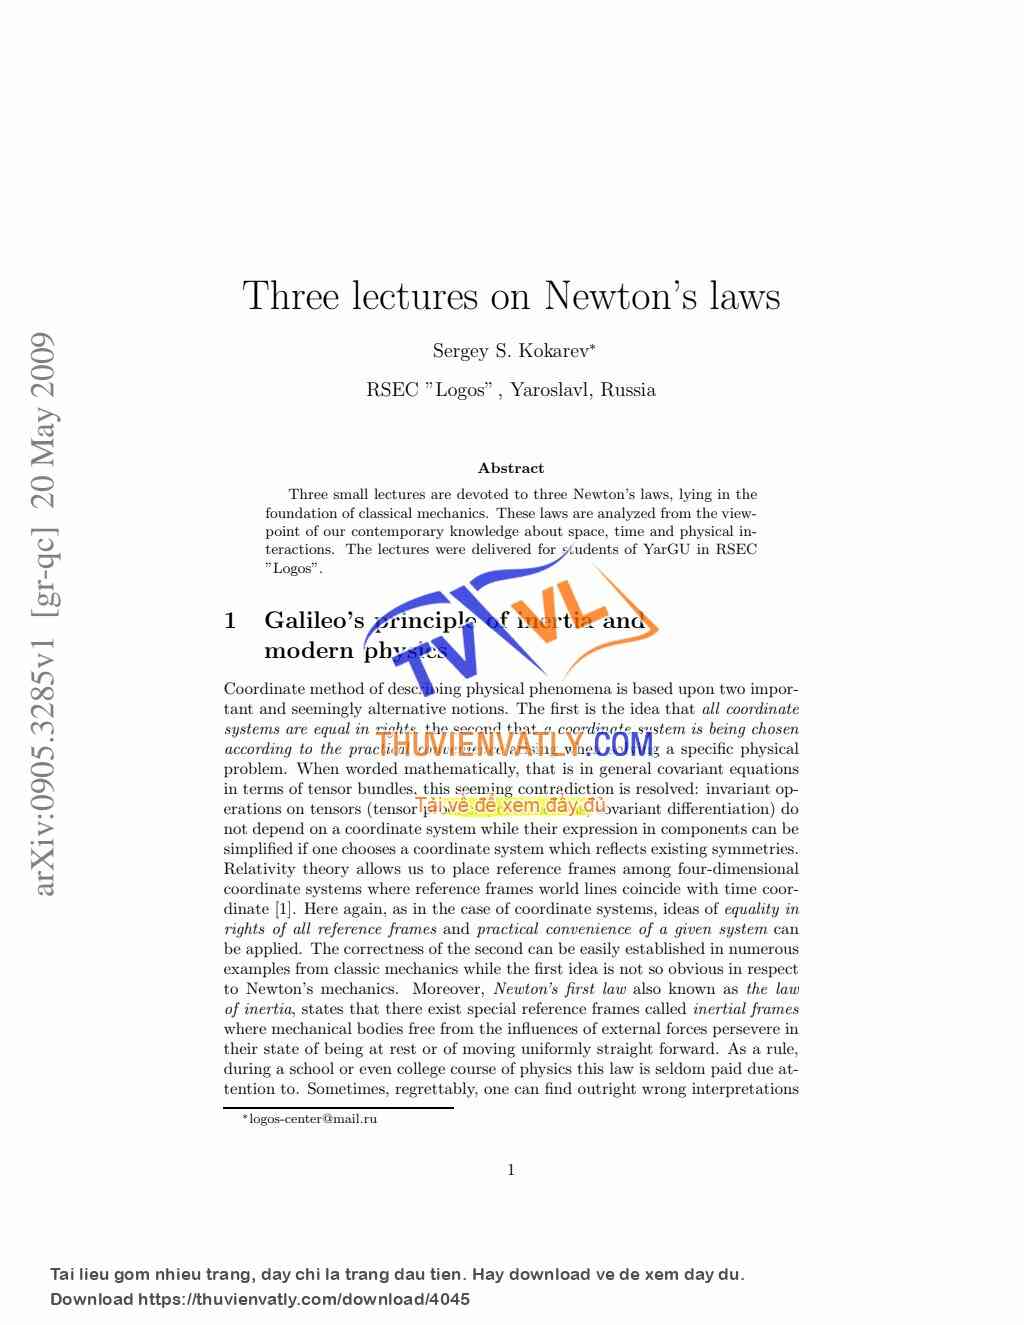 Three lectures on Newton's laws